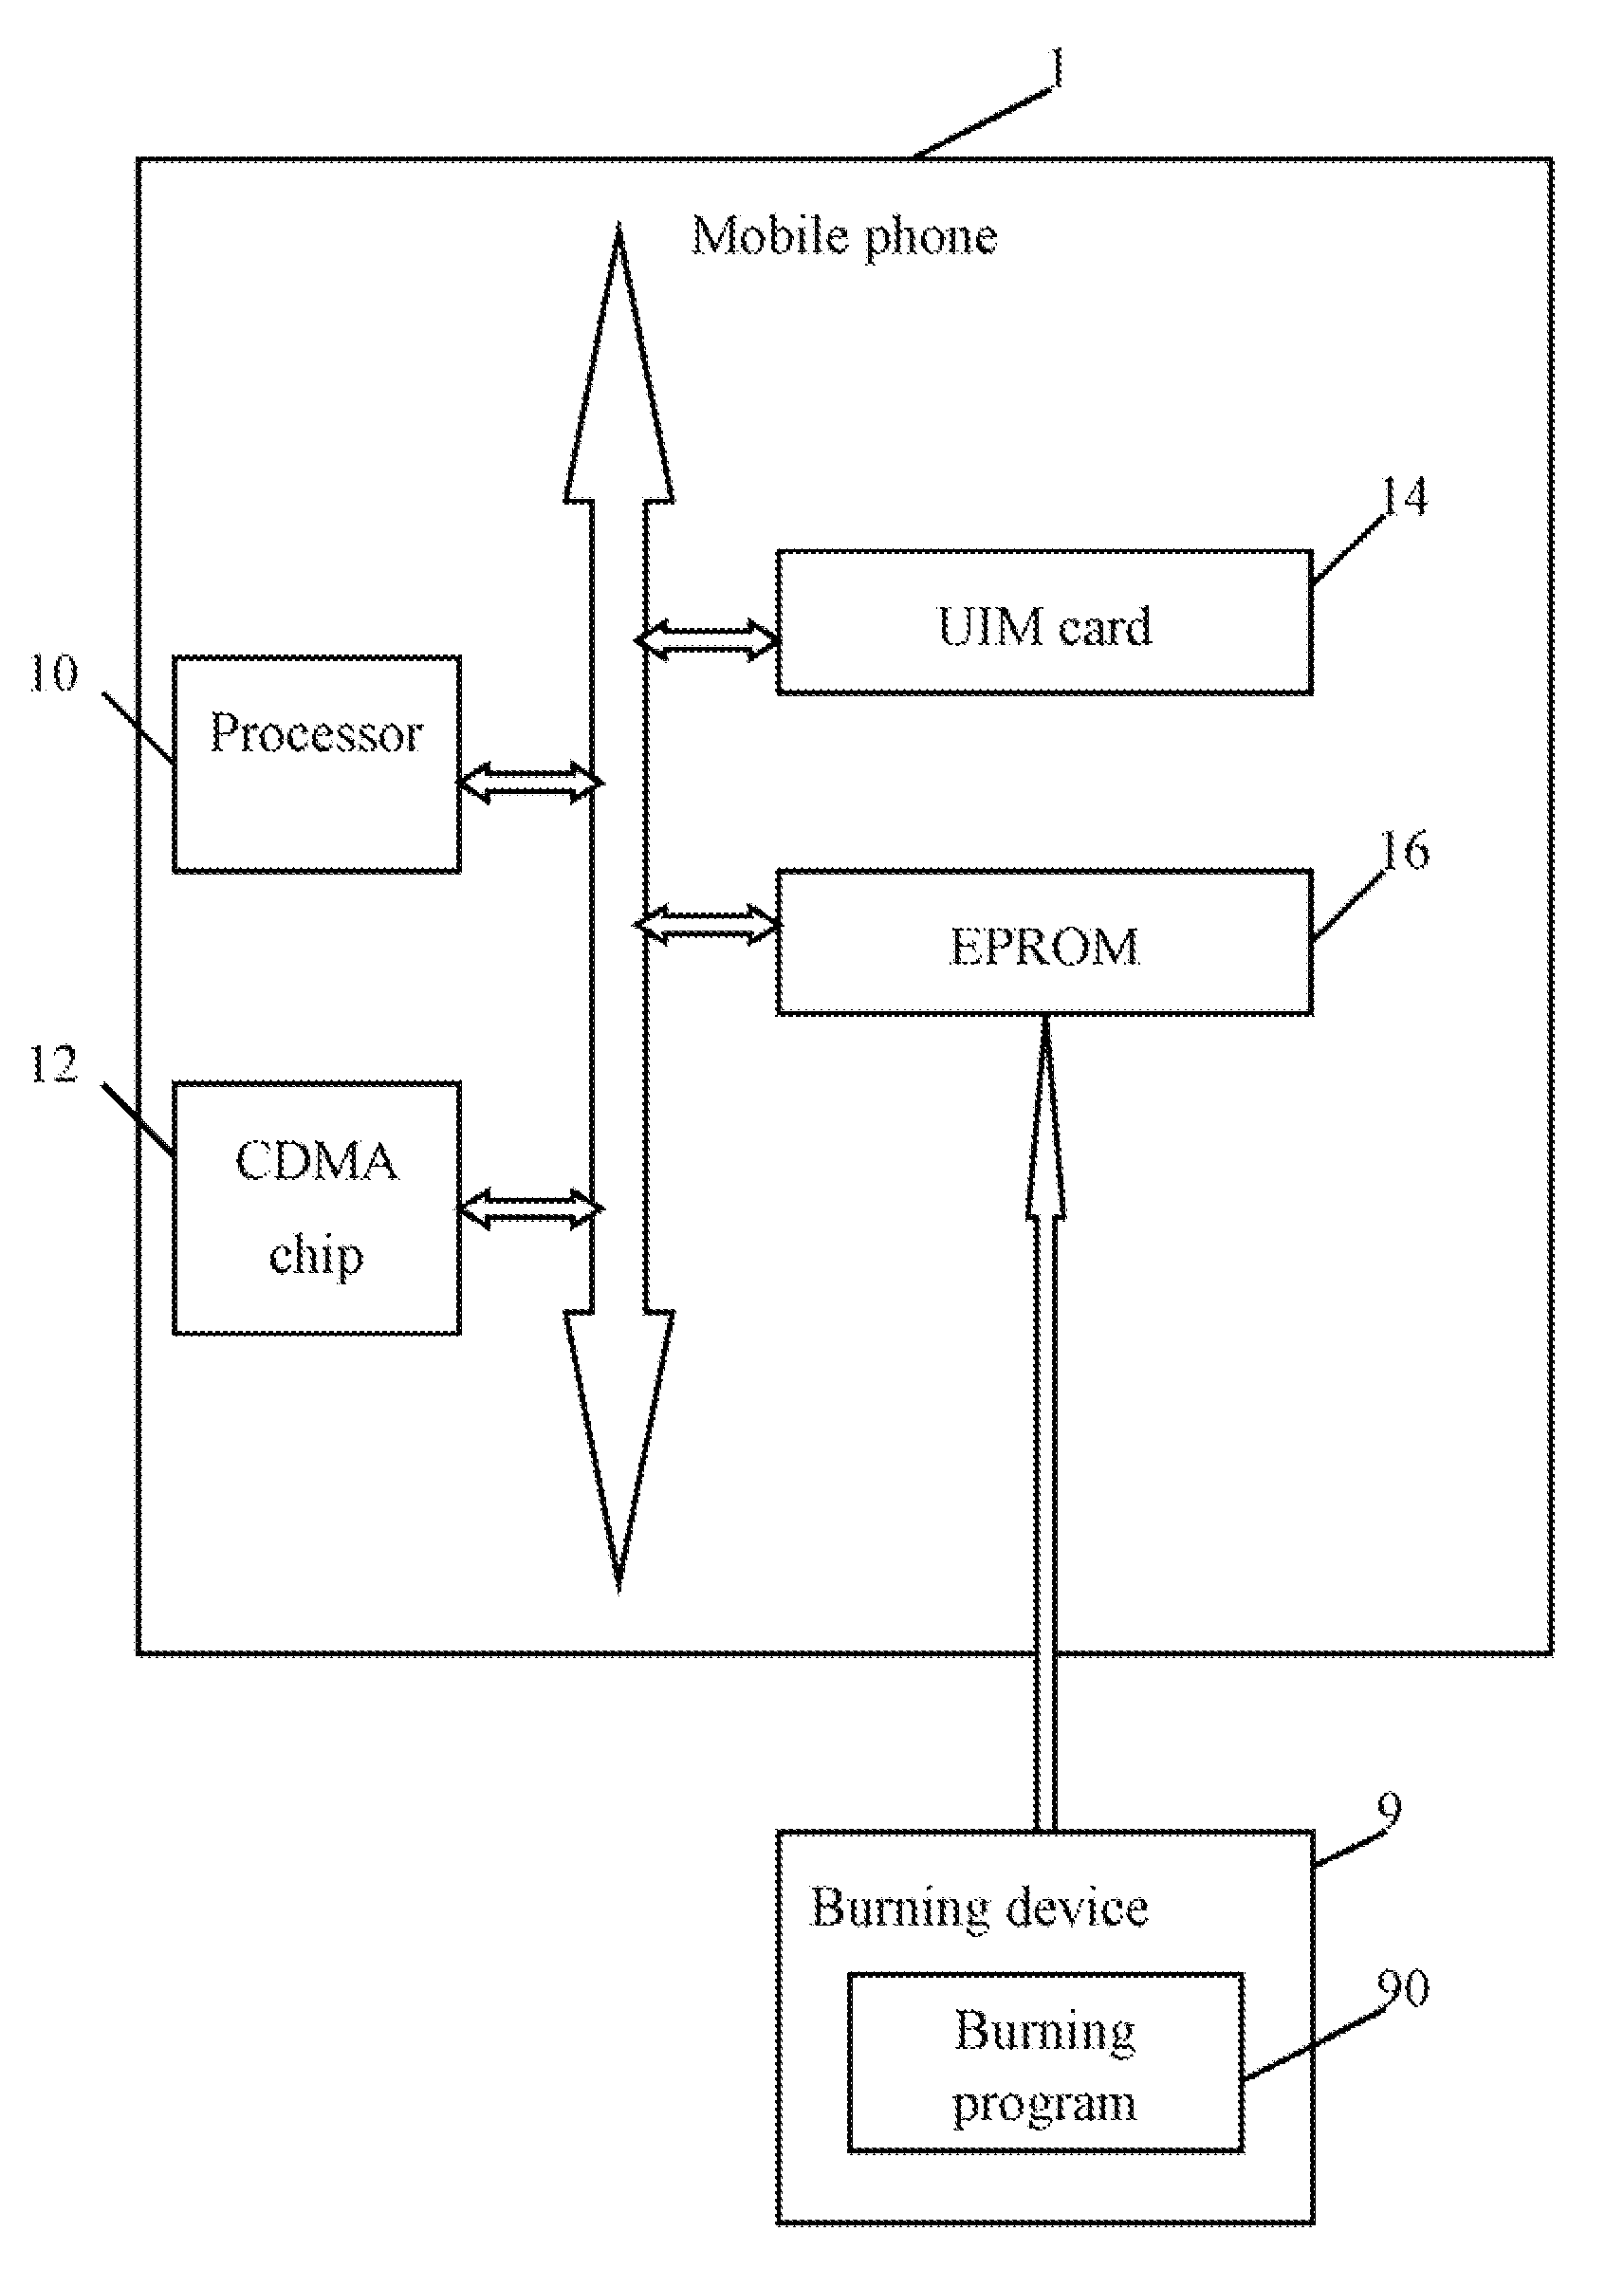 Network listening method of a mobile phone